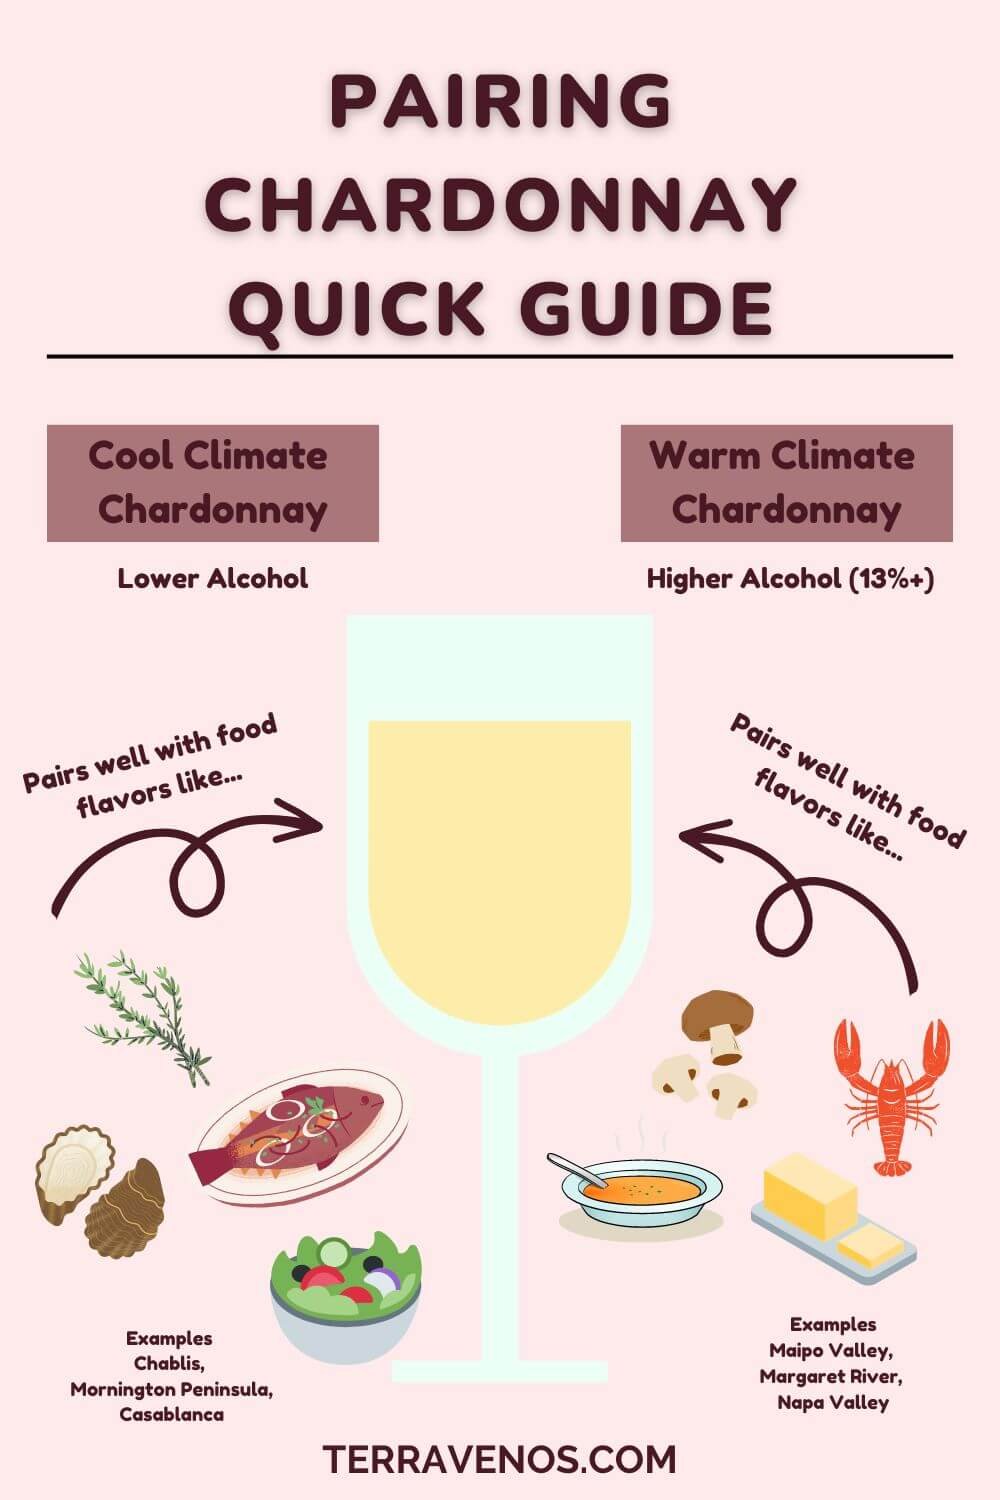 chardonnay-food-pairing-quick-guide-infographic-warm-cool-climate-chardonnay